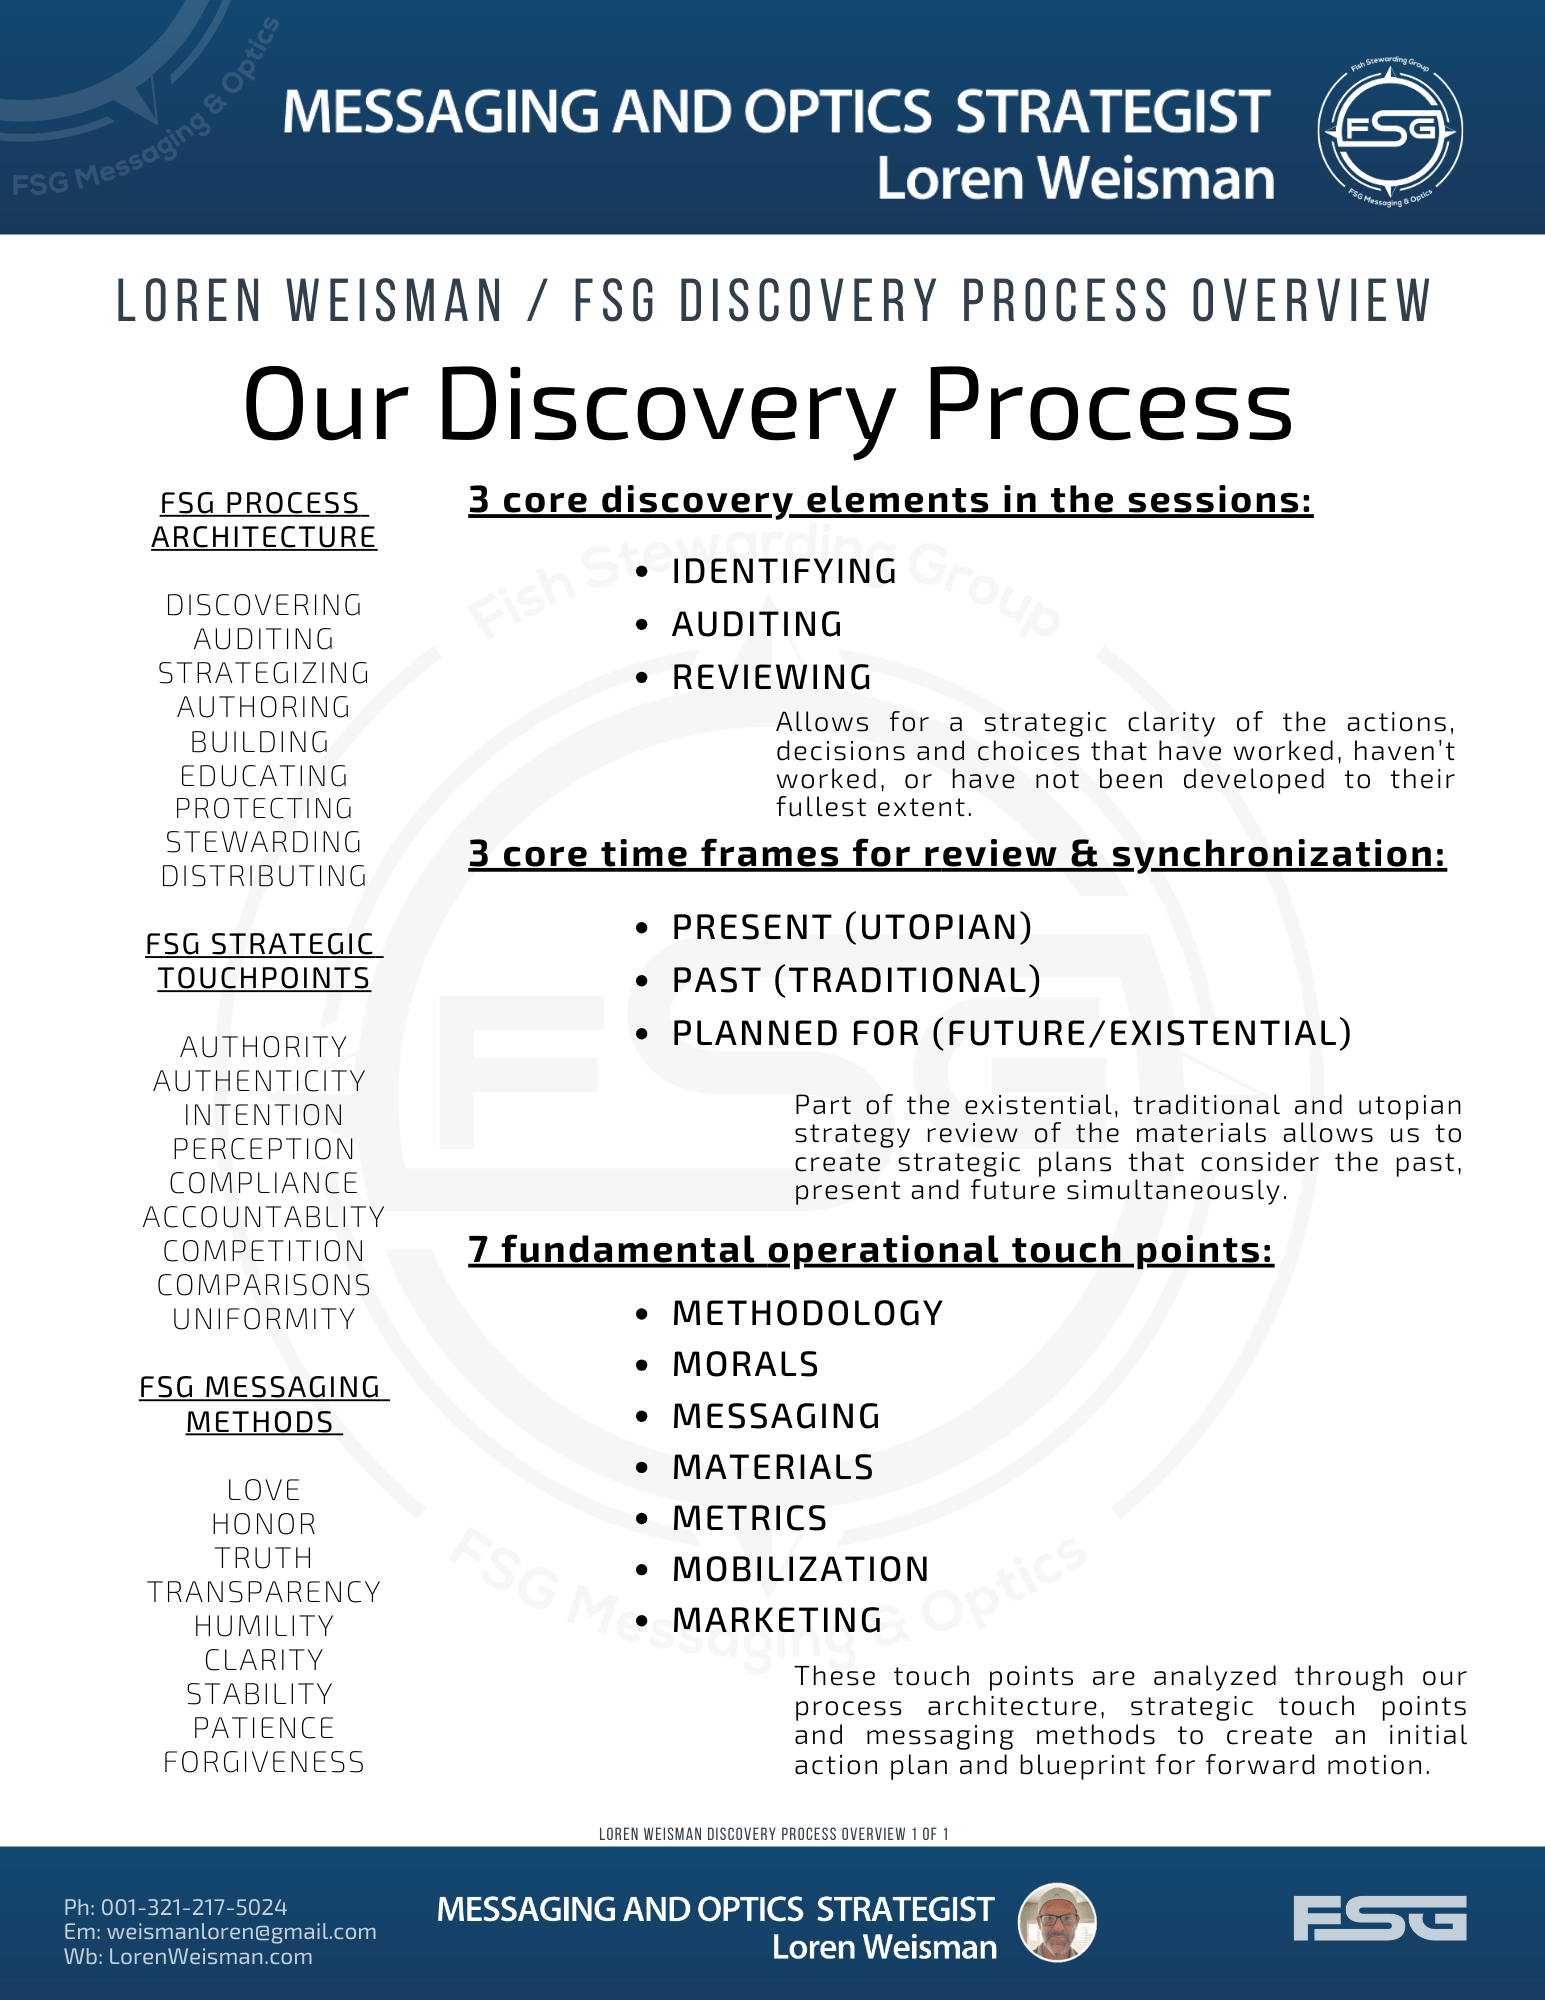 Discovery Process Overview for Messaging and Optics